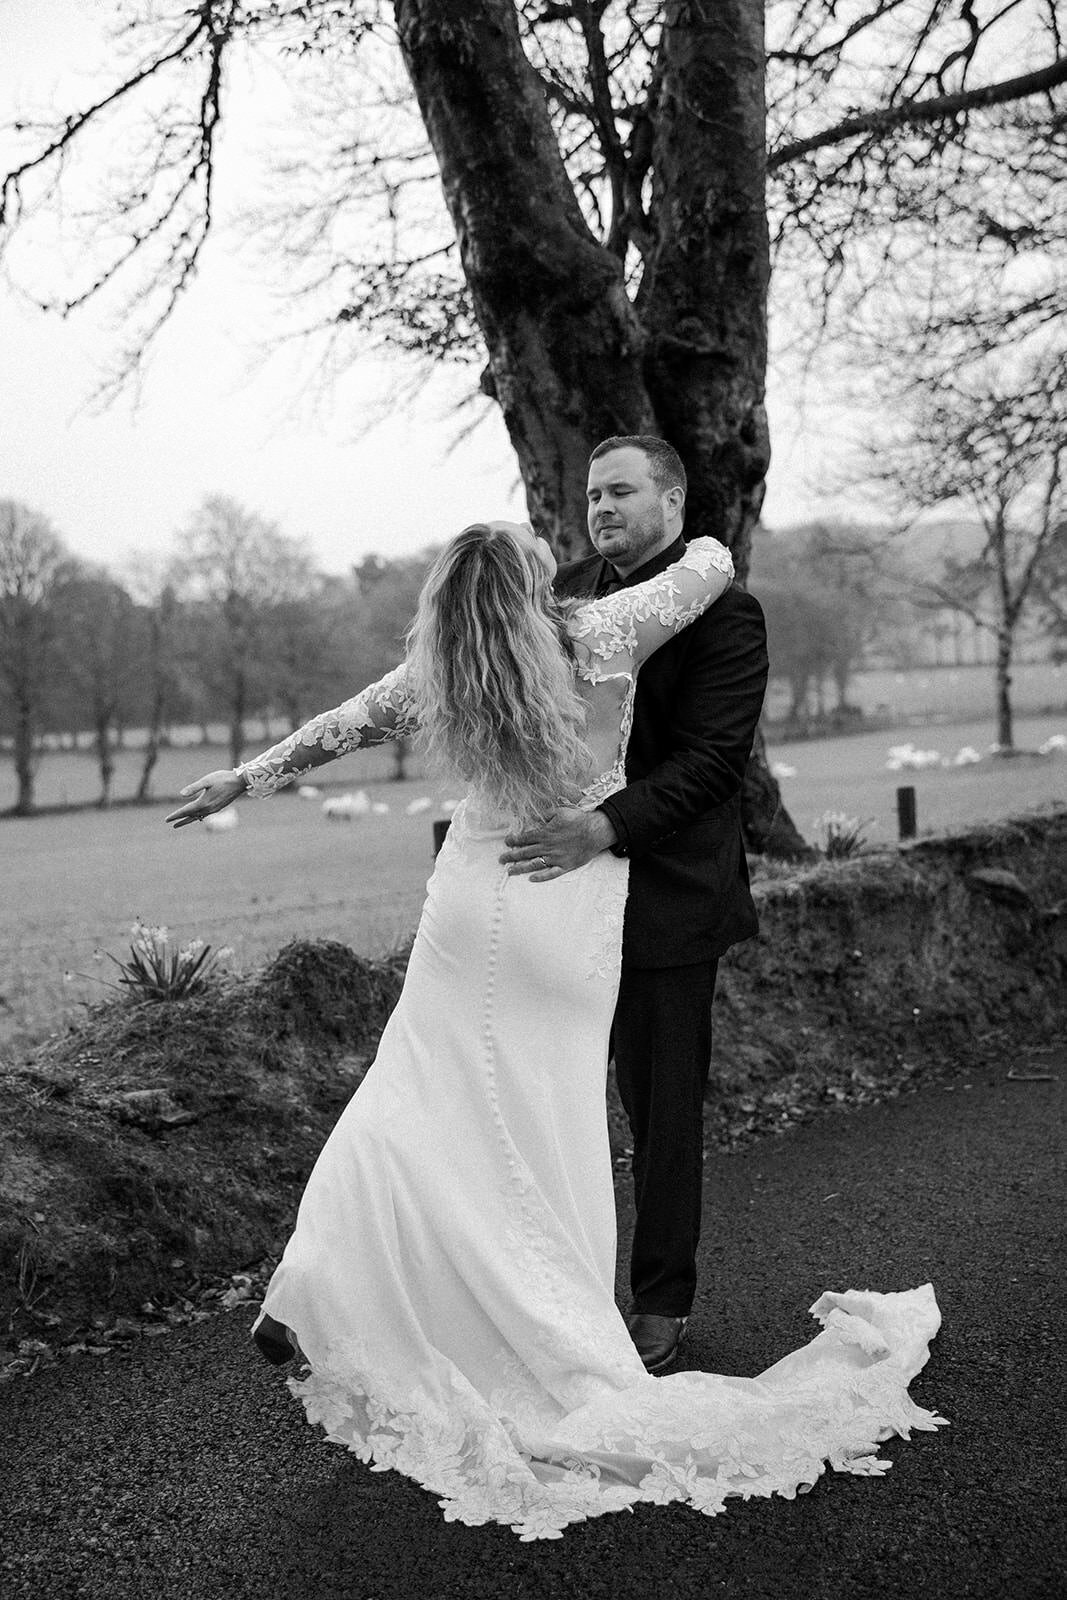 A couple dancing on a road lined with trees, the bride's white dress trailing behind